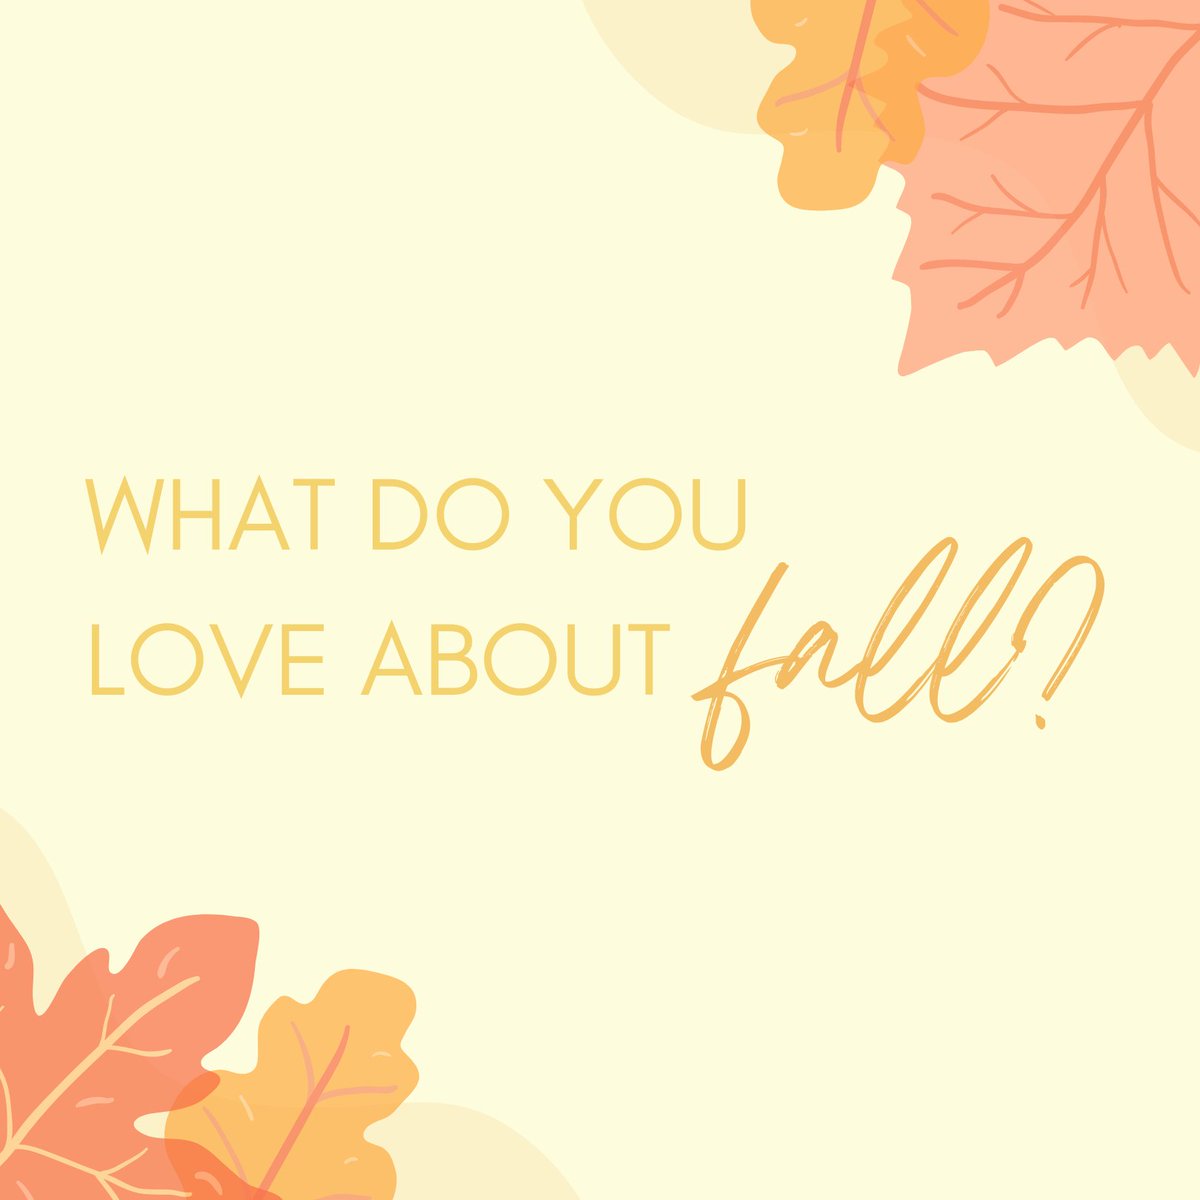 What do you love about fall?🍁🍂🎃

Comment below! 
.
.
.
.
#fall #happyfall #Fall2022 #Halloween #fall #giftideas #tshirt #personalized #giftsforhim #giftsforher #spookyszn #spooky #halloweenshirt #tshirtdesign #personalizedgifts #personalizedmugs #blackownedbusiness #blackowned